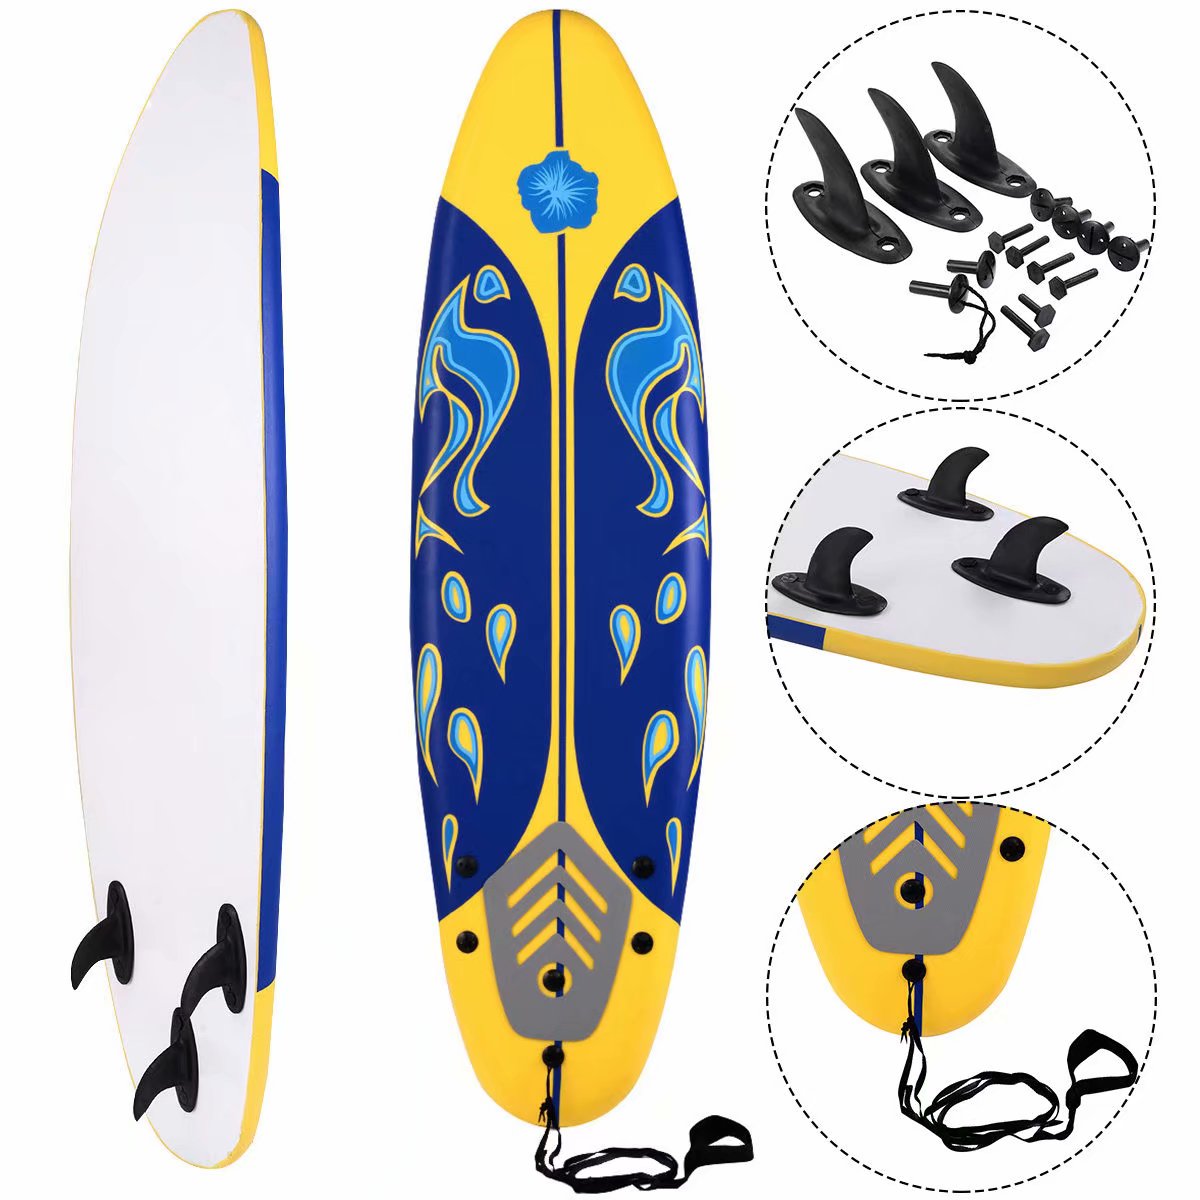 SKONYON 6' Surfboard Surfing Surf Beach Ocean Body Foamie Board with Removable Fins Great Beginner Board for Kids Adults and Children